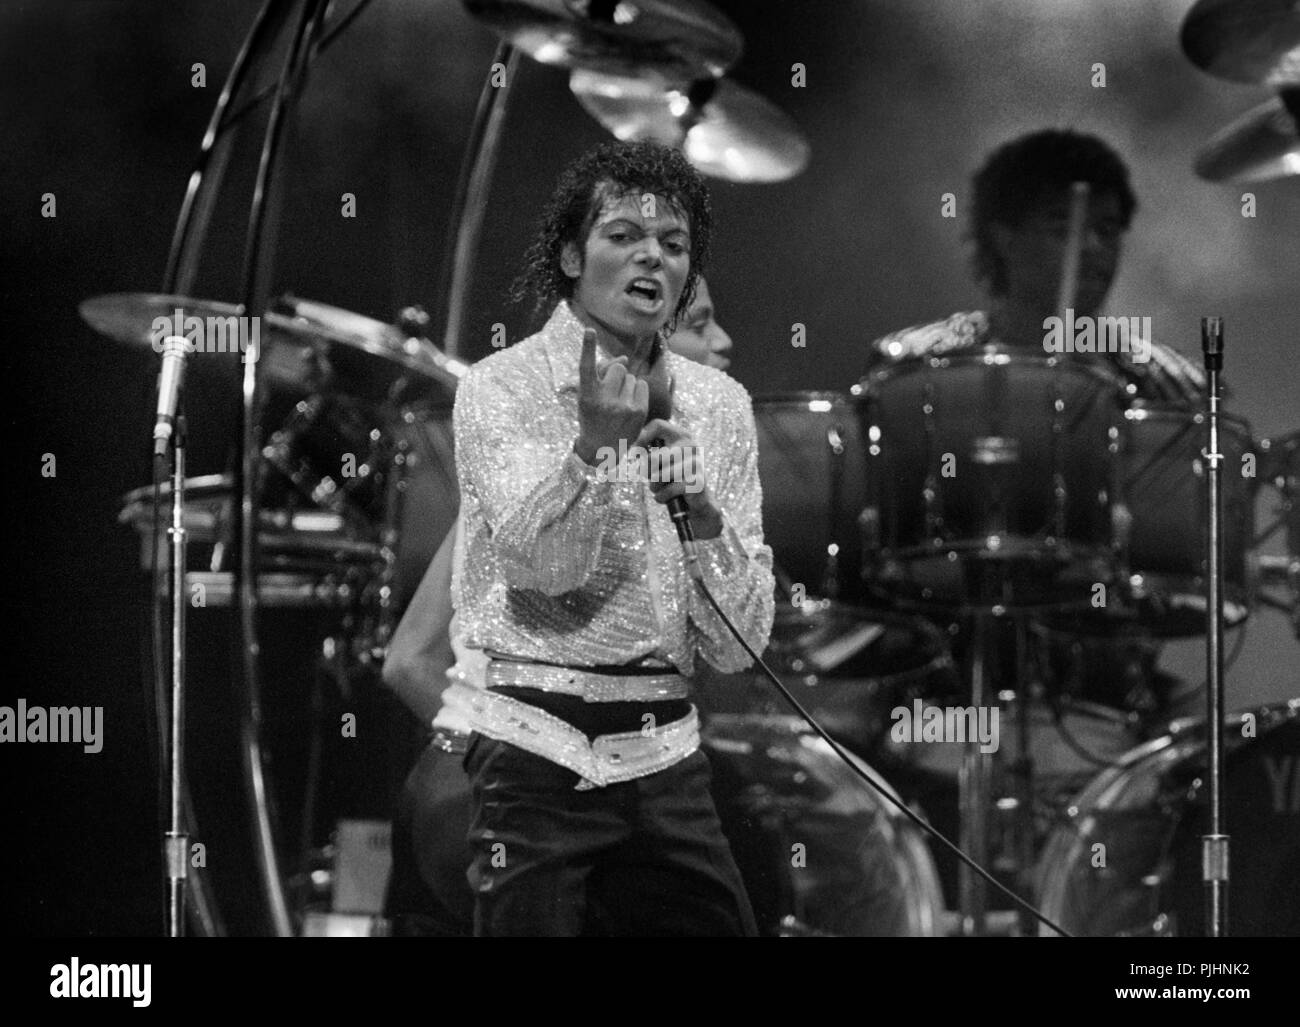 Michael Jackson performs at Chicago's Comiskey Park in 1984. Stock Photo